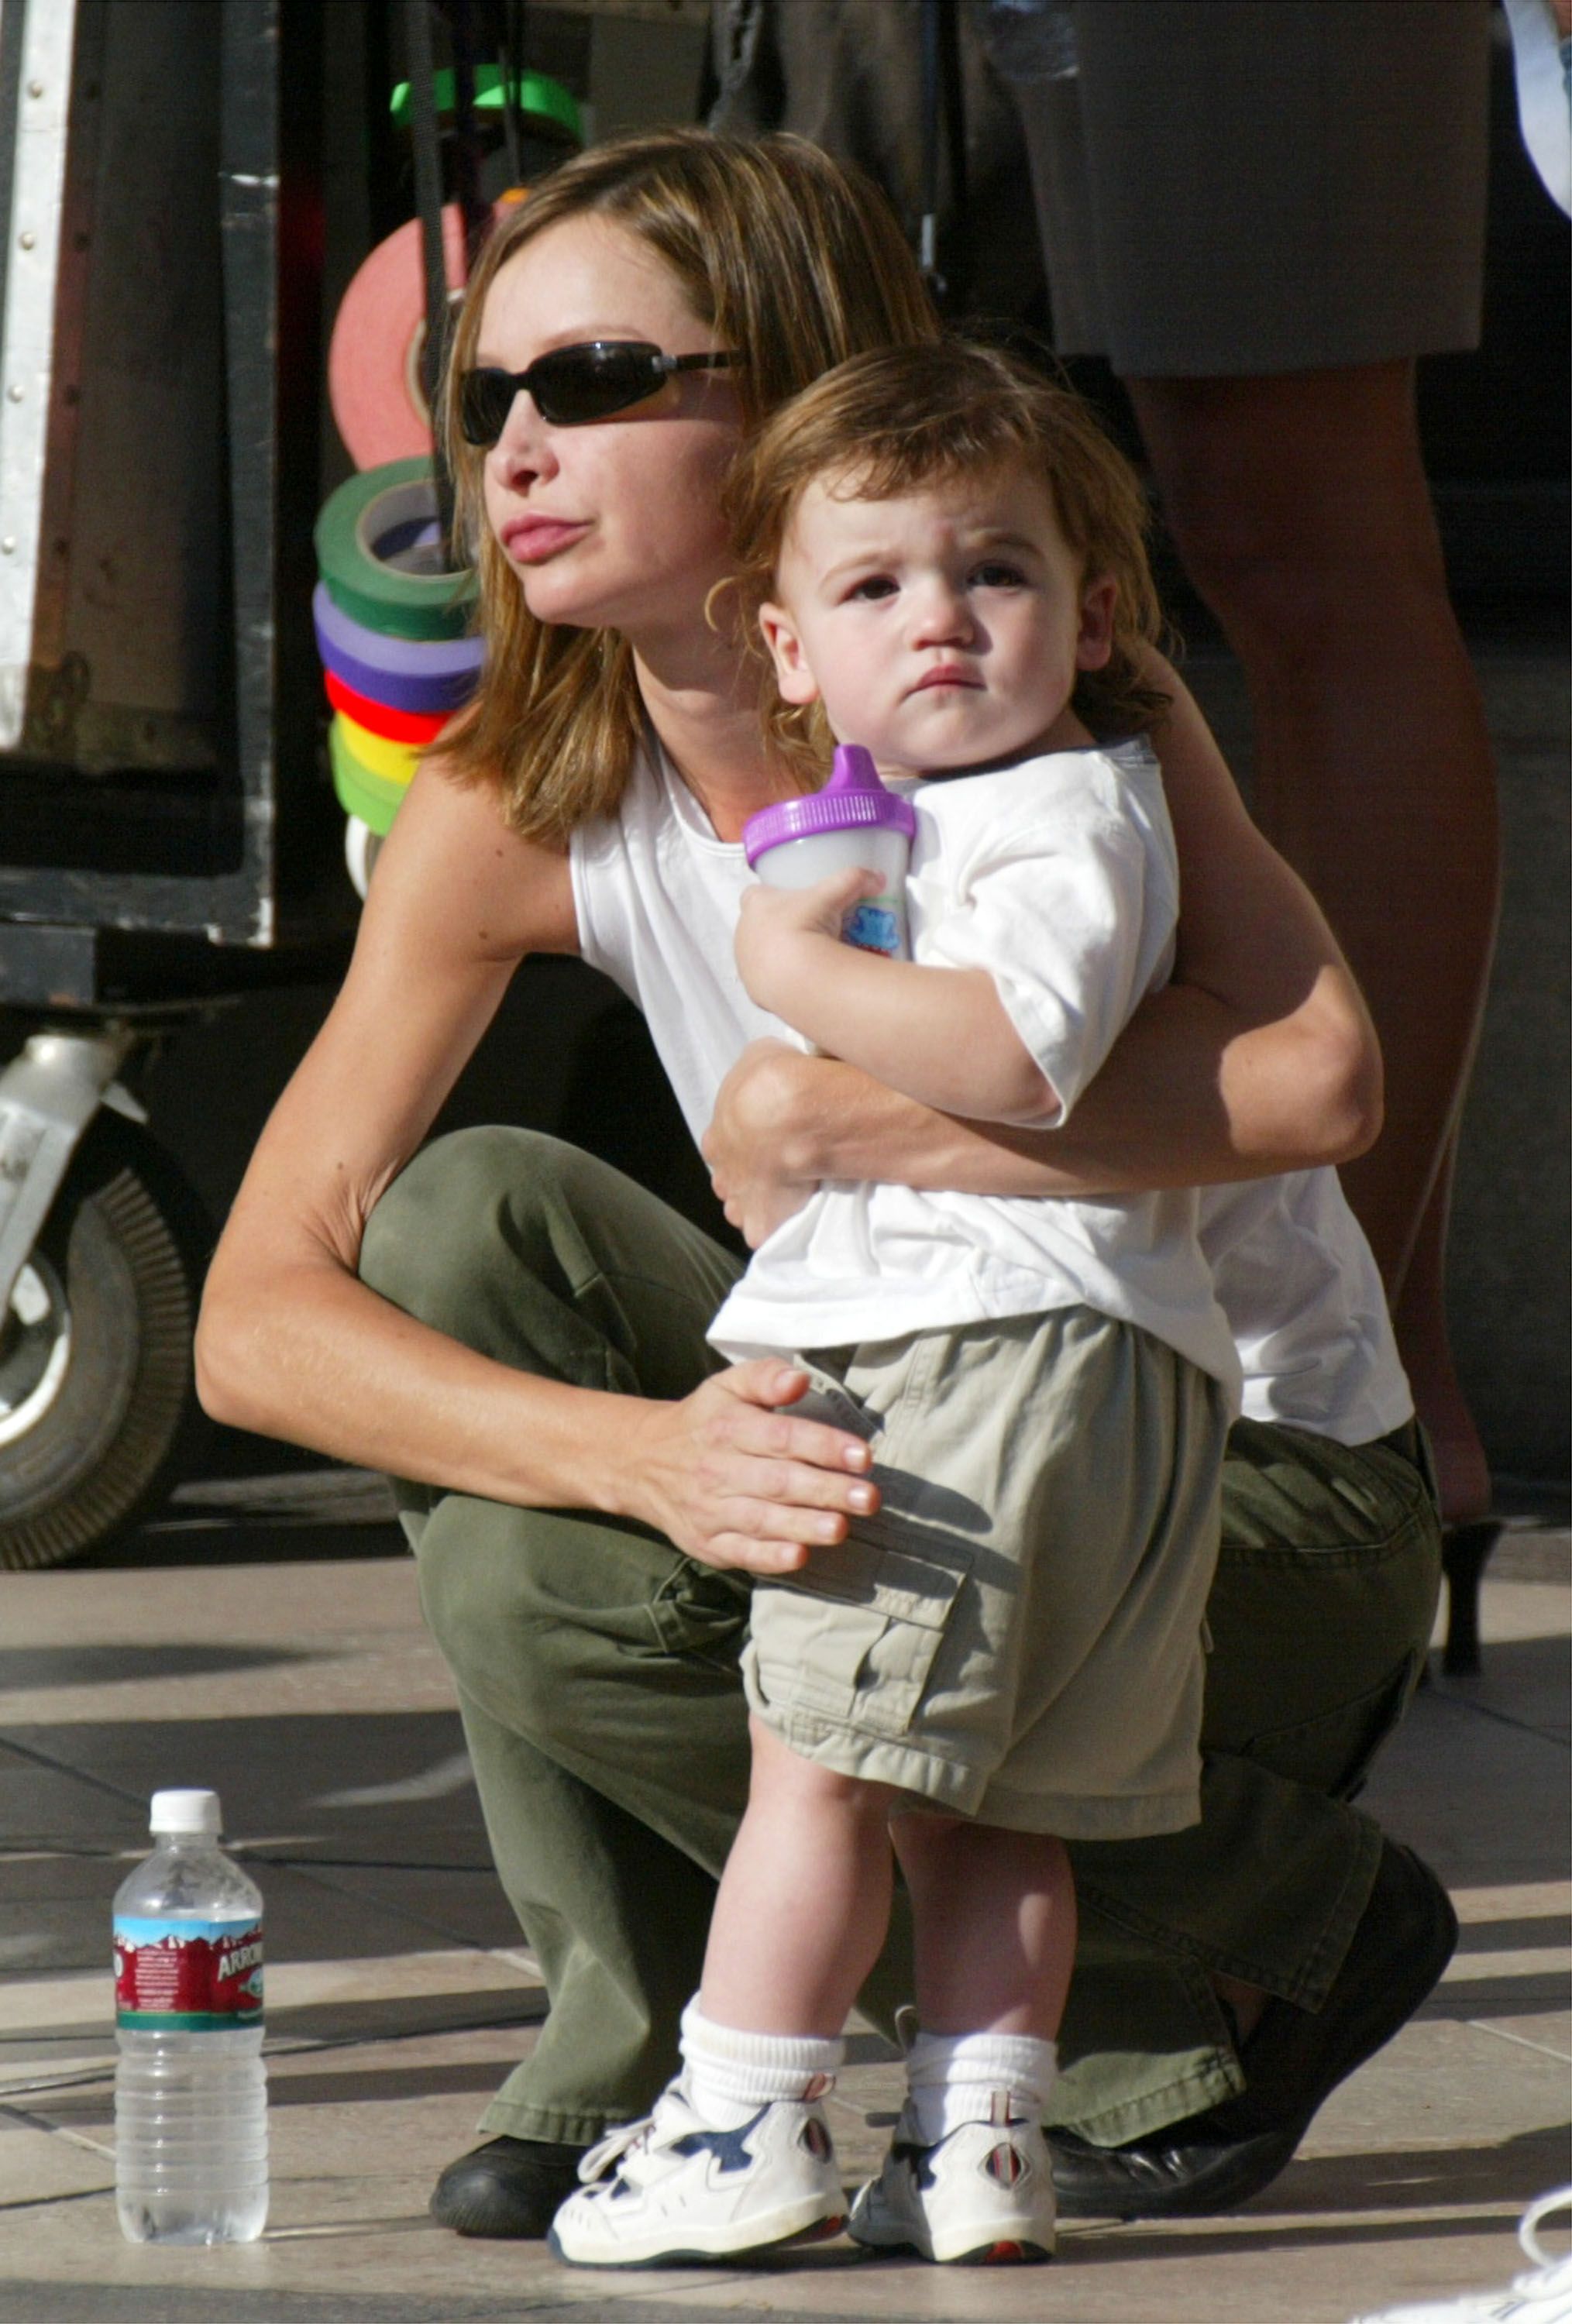 Calista Flockhart with her son, Liam, on the set of Harrison Ford's upcoming movie, "Two Cops" on September 17, 2002, in Beverly Hills, California. | Source: Frazer Harrison/Getty Images